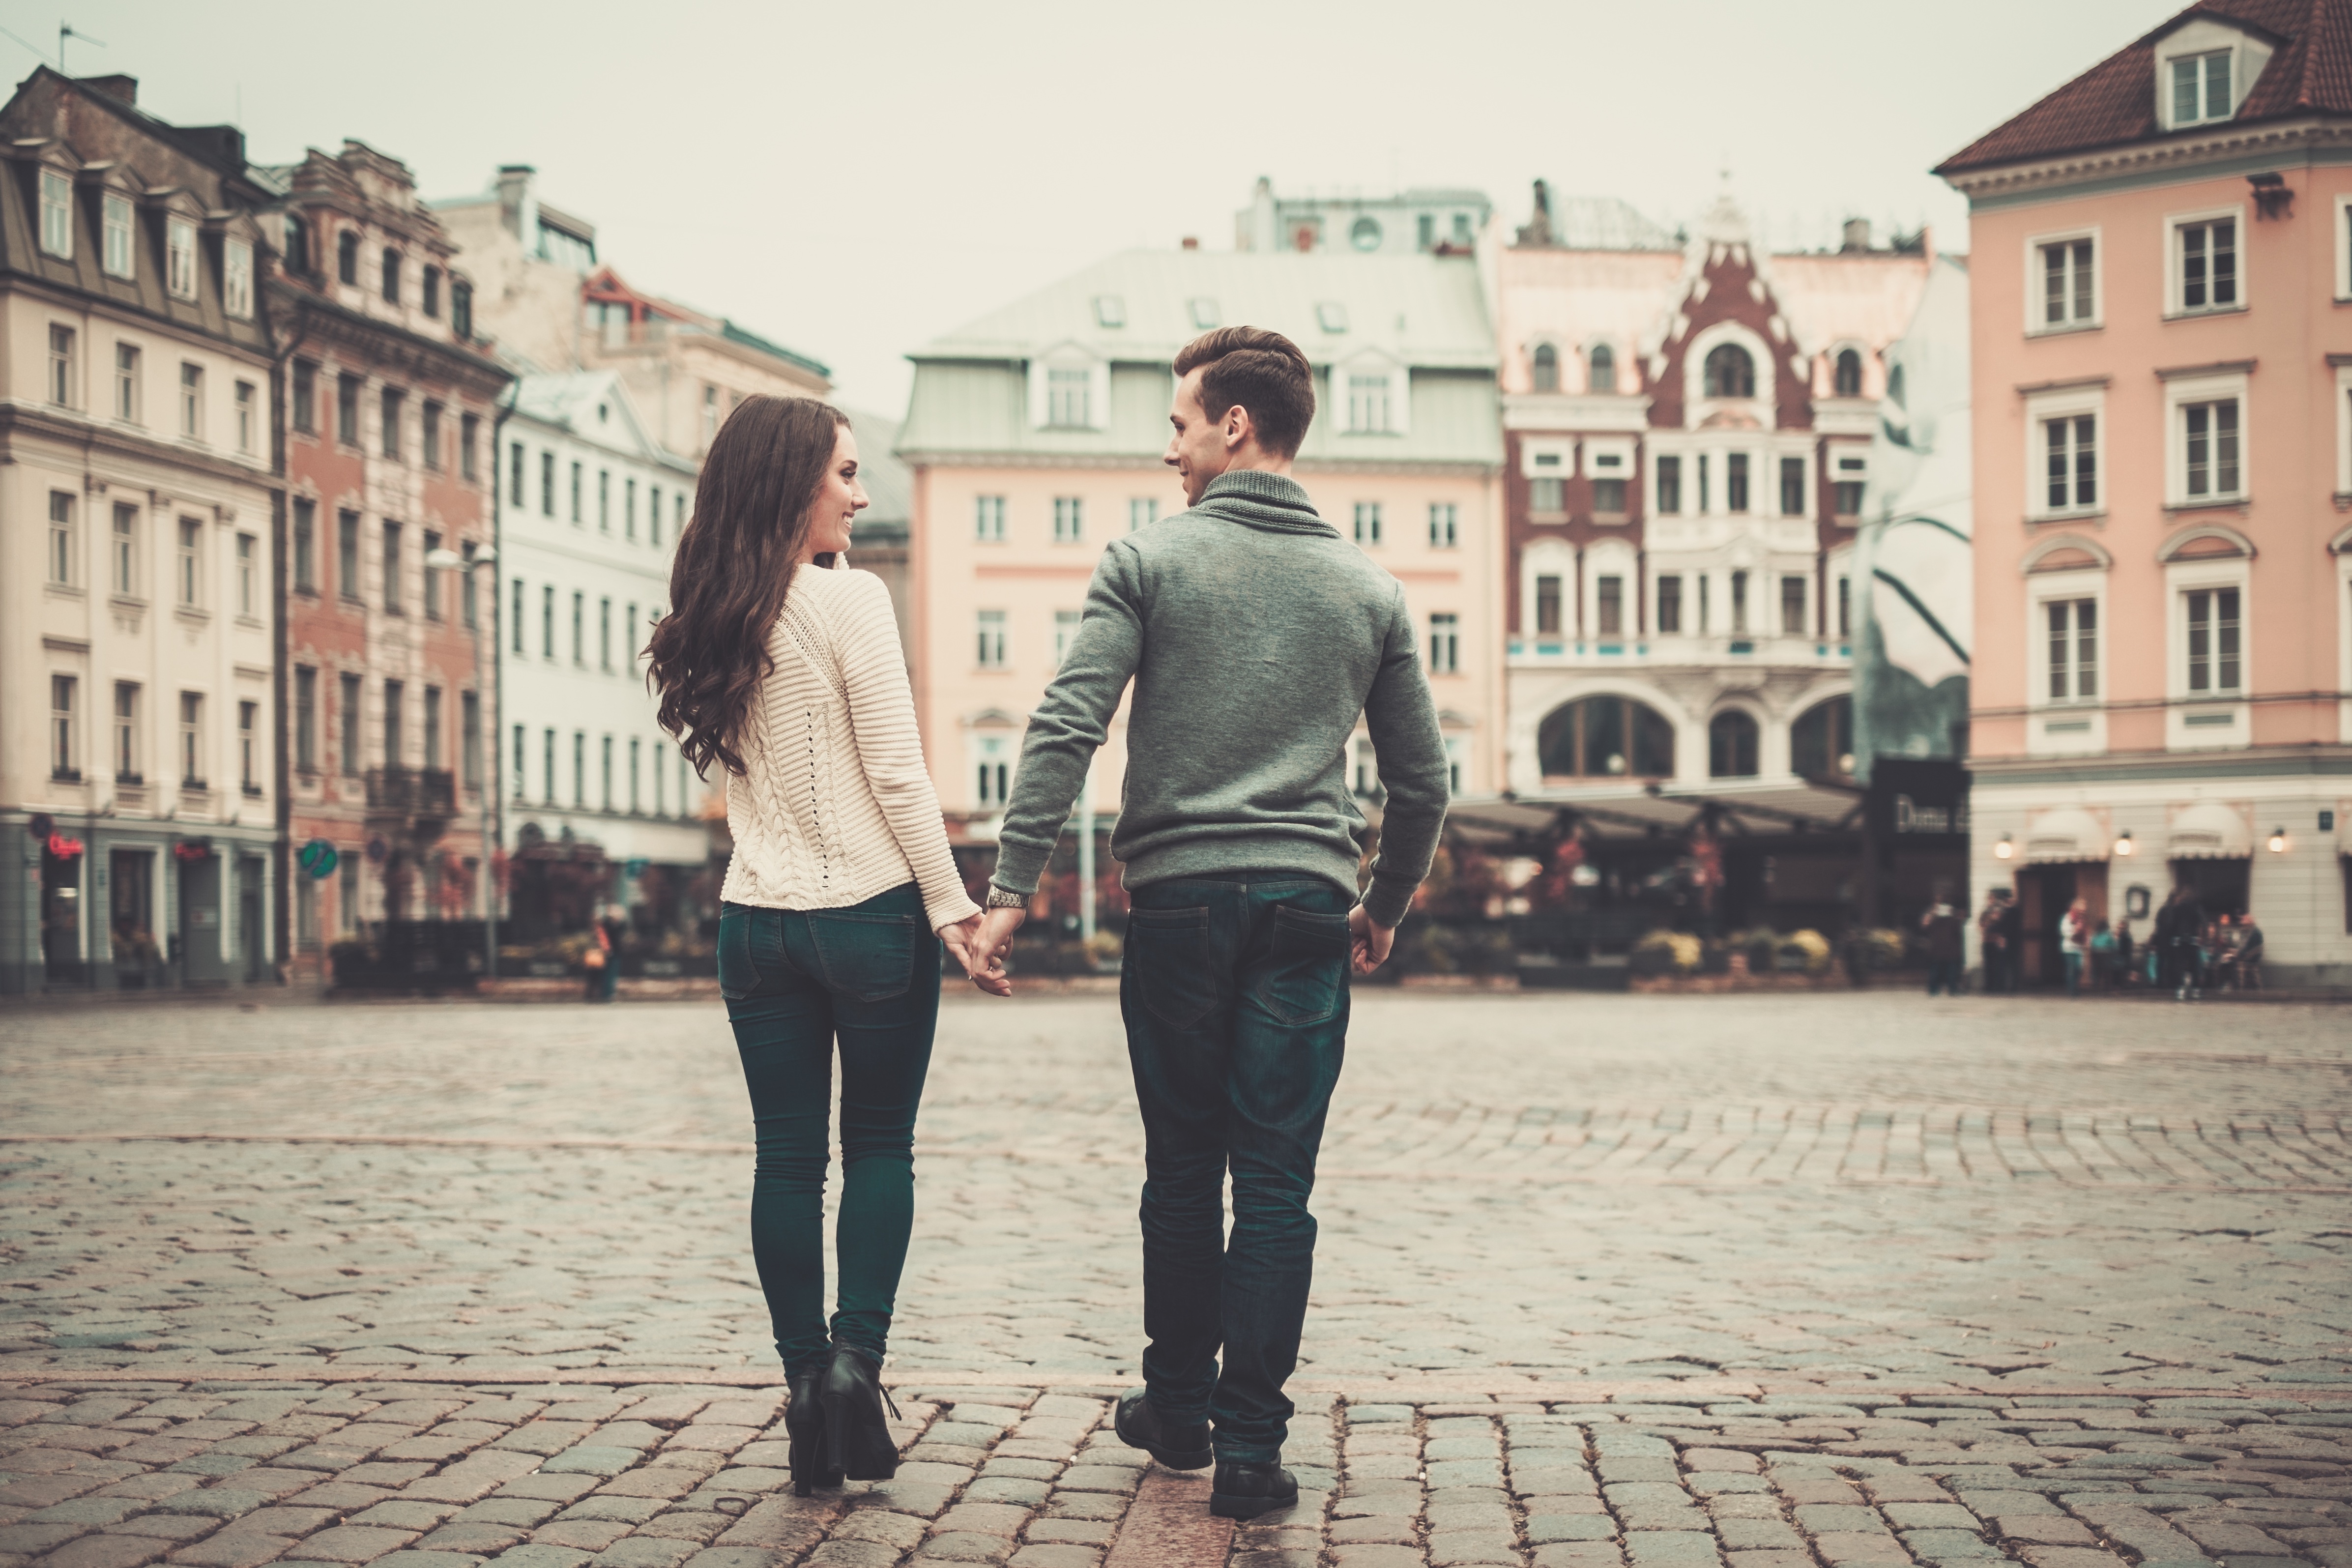 A couple walking while holding hands | Source: Shutterstock